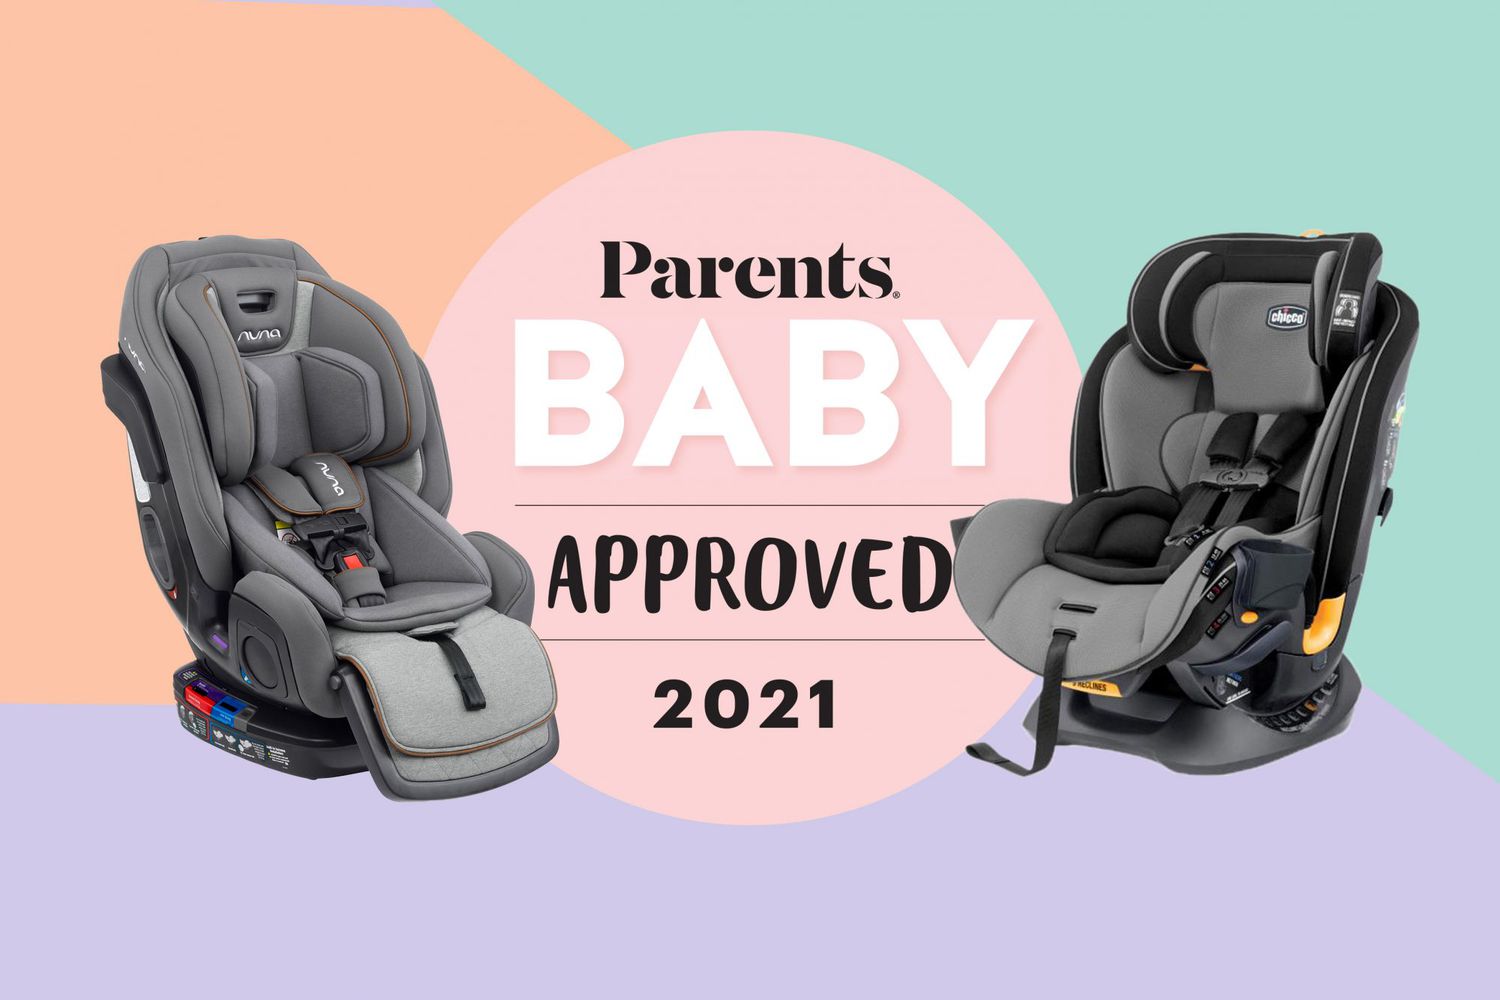 11 Best Convertible Car Seats 2021 Pas - Top Car Seats For Toddlers 2020